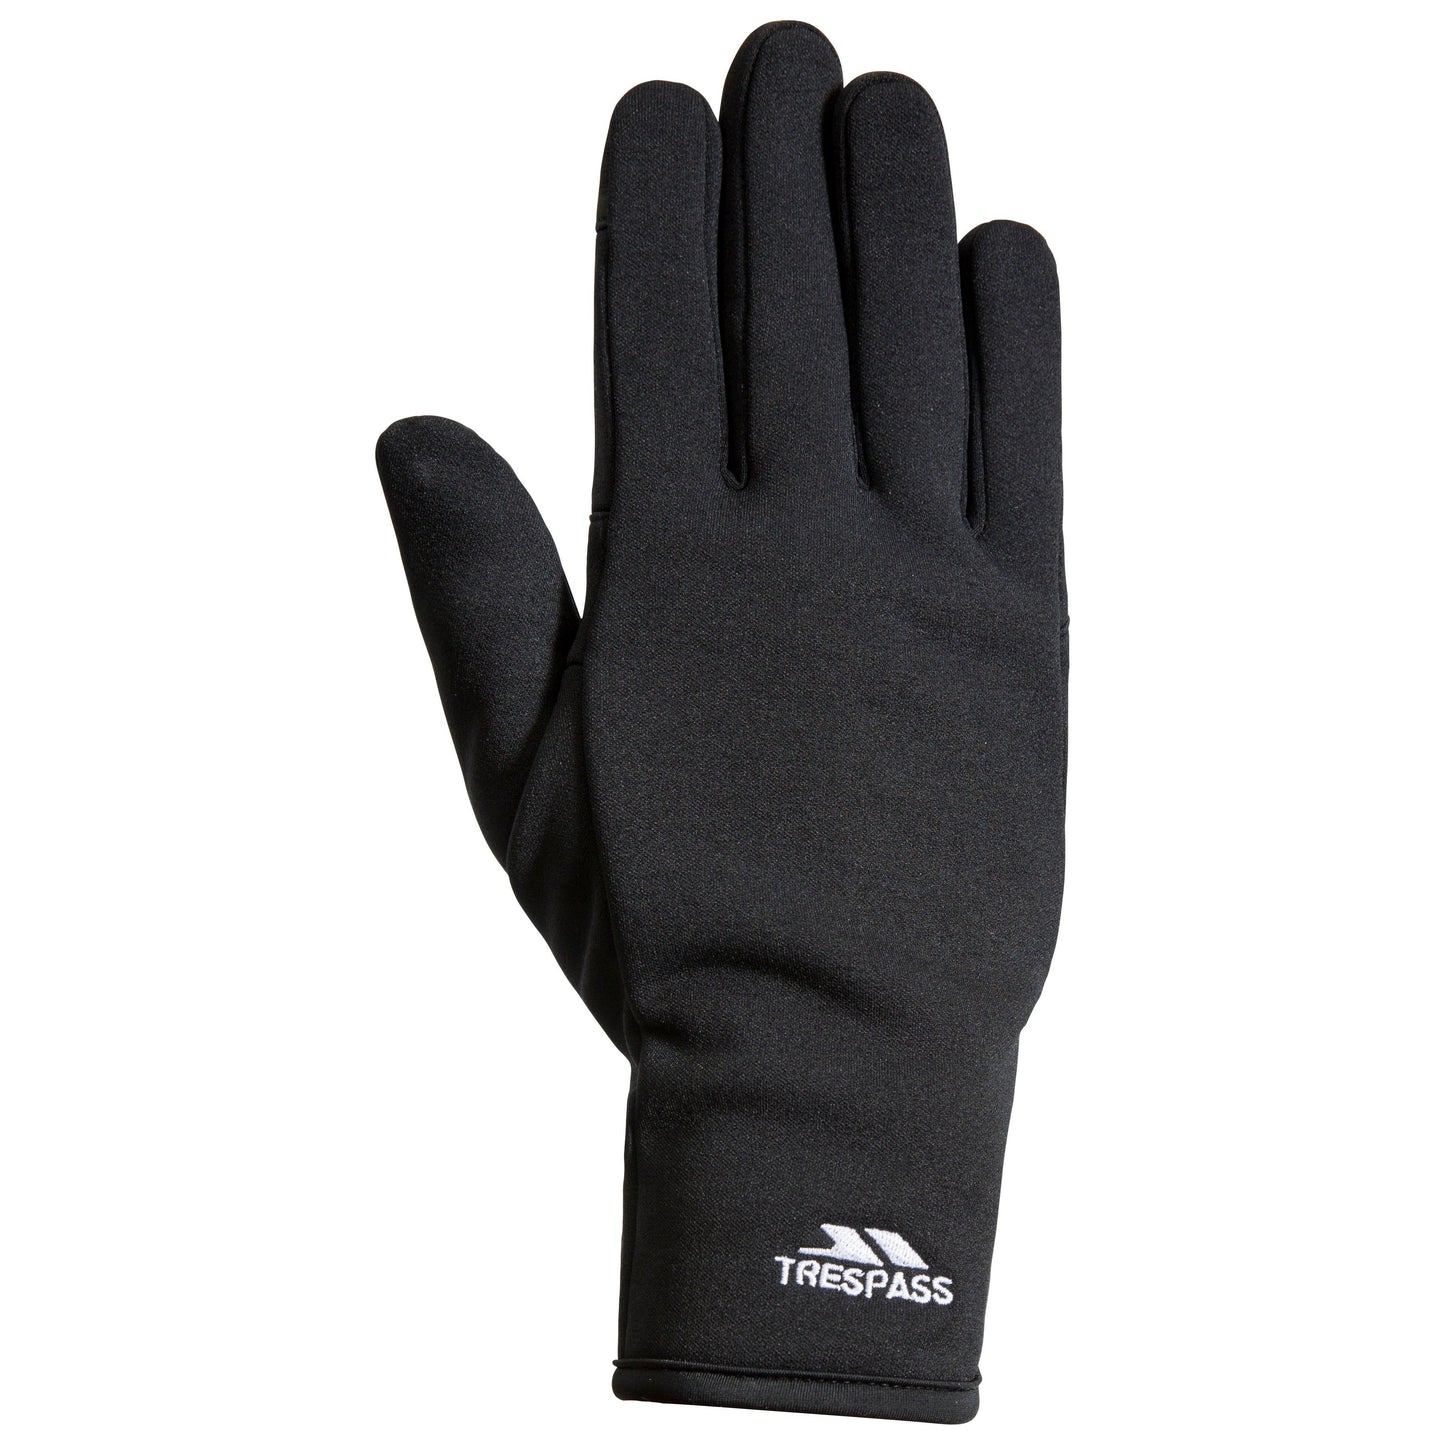 Poliner Unisex Adults' Stretch Gloves With Touch Screen Fingertips